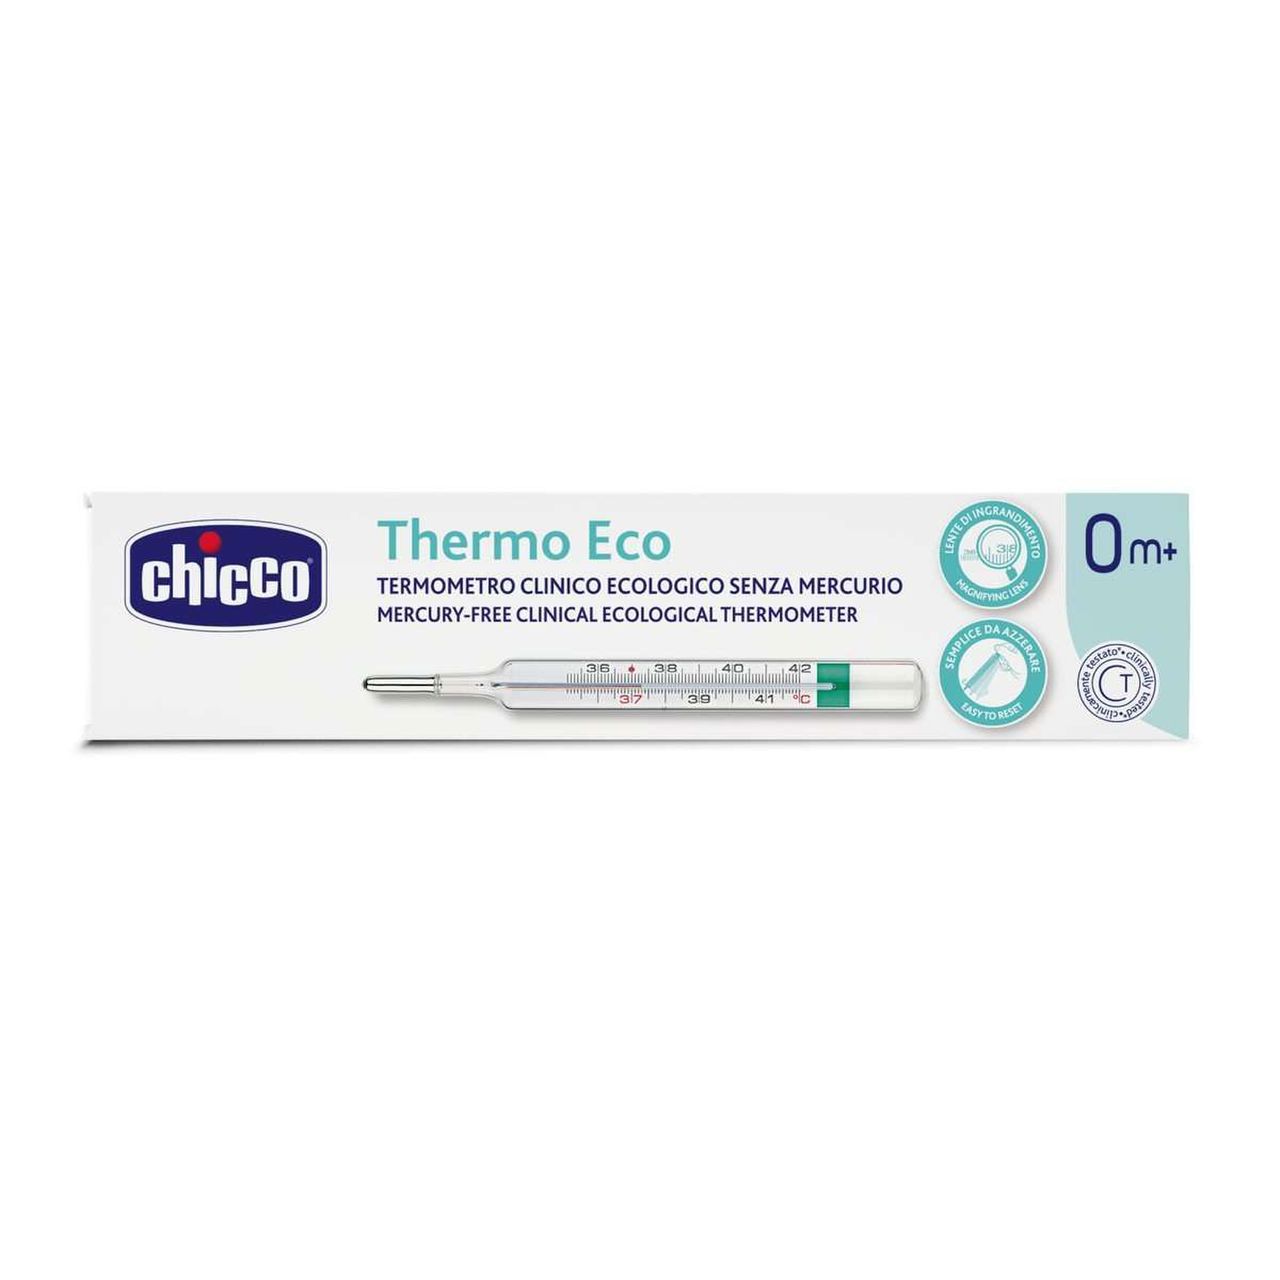 THERMO ECO 0m+ image number 2